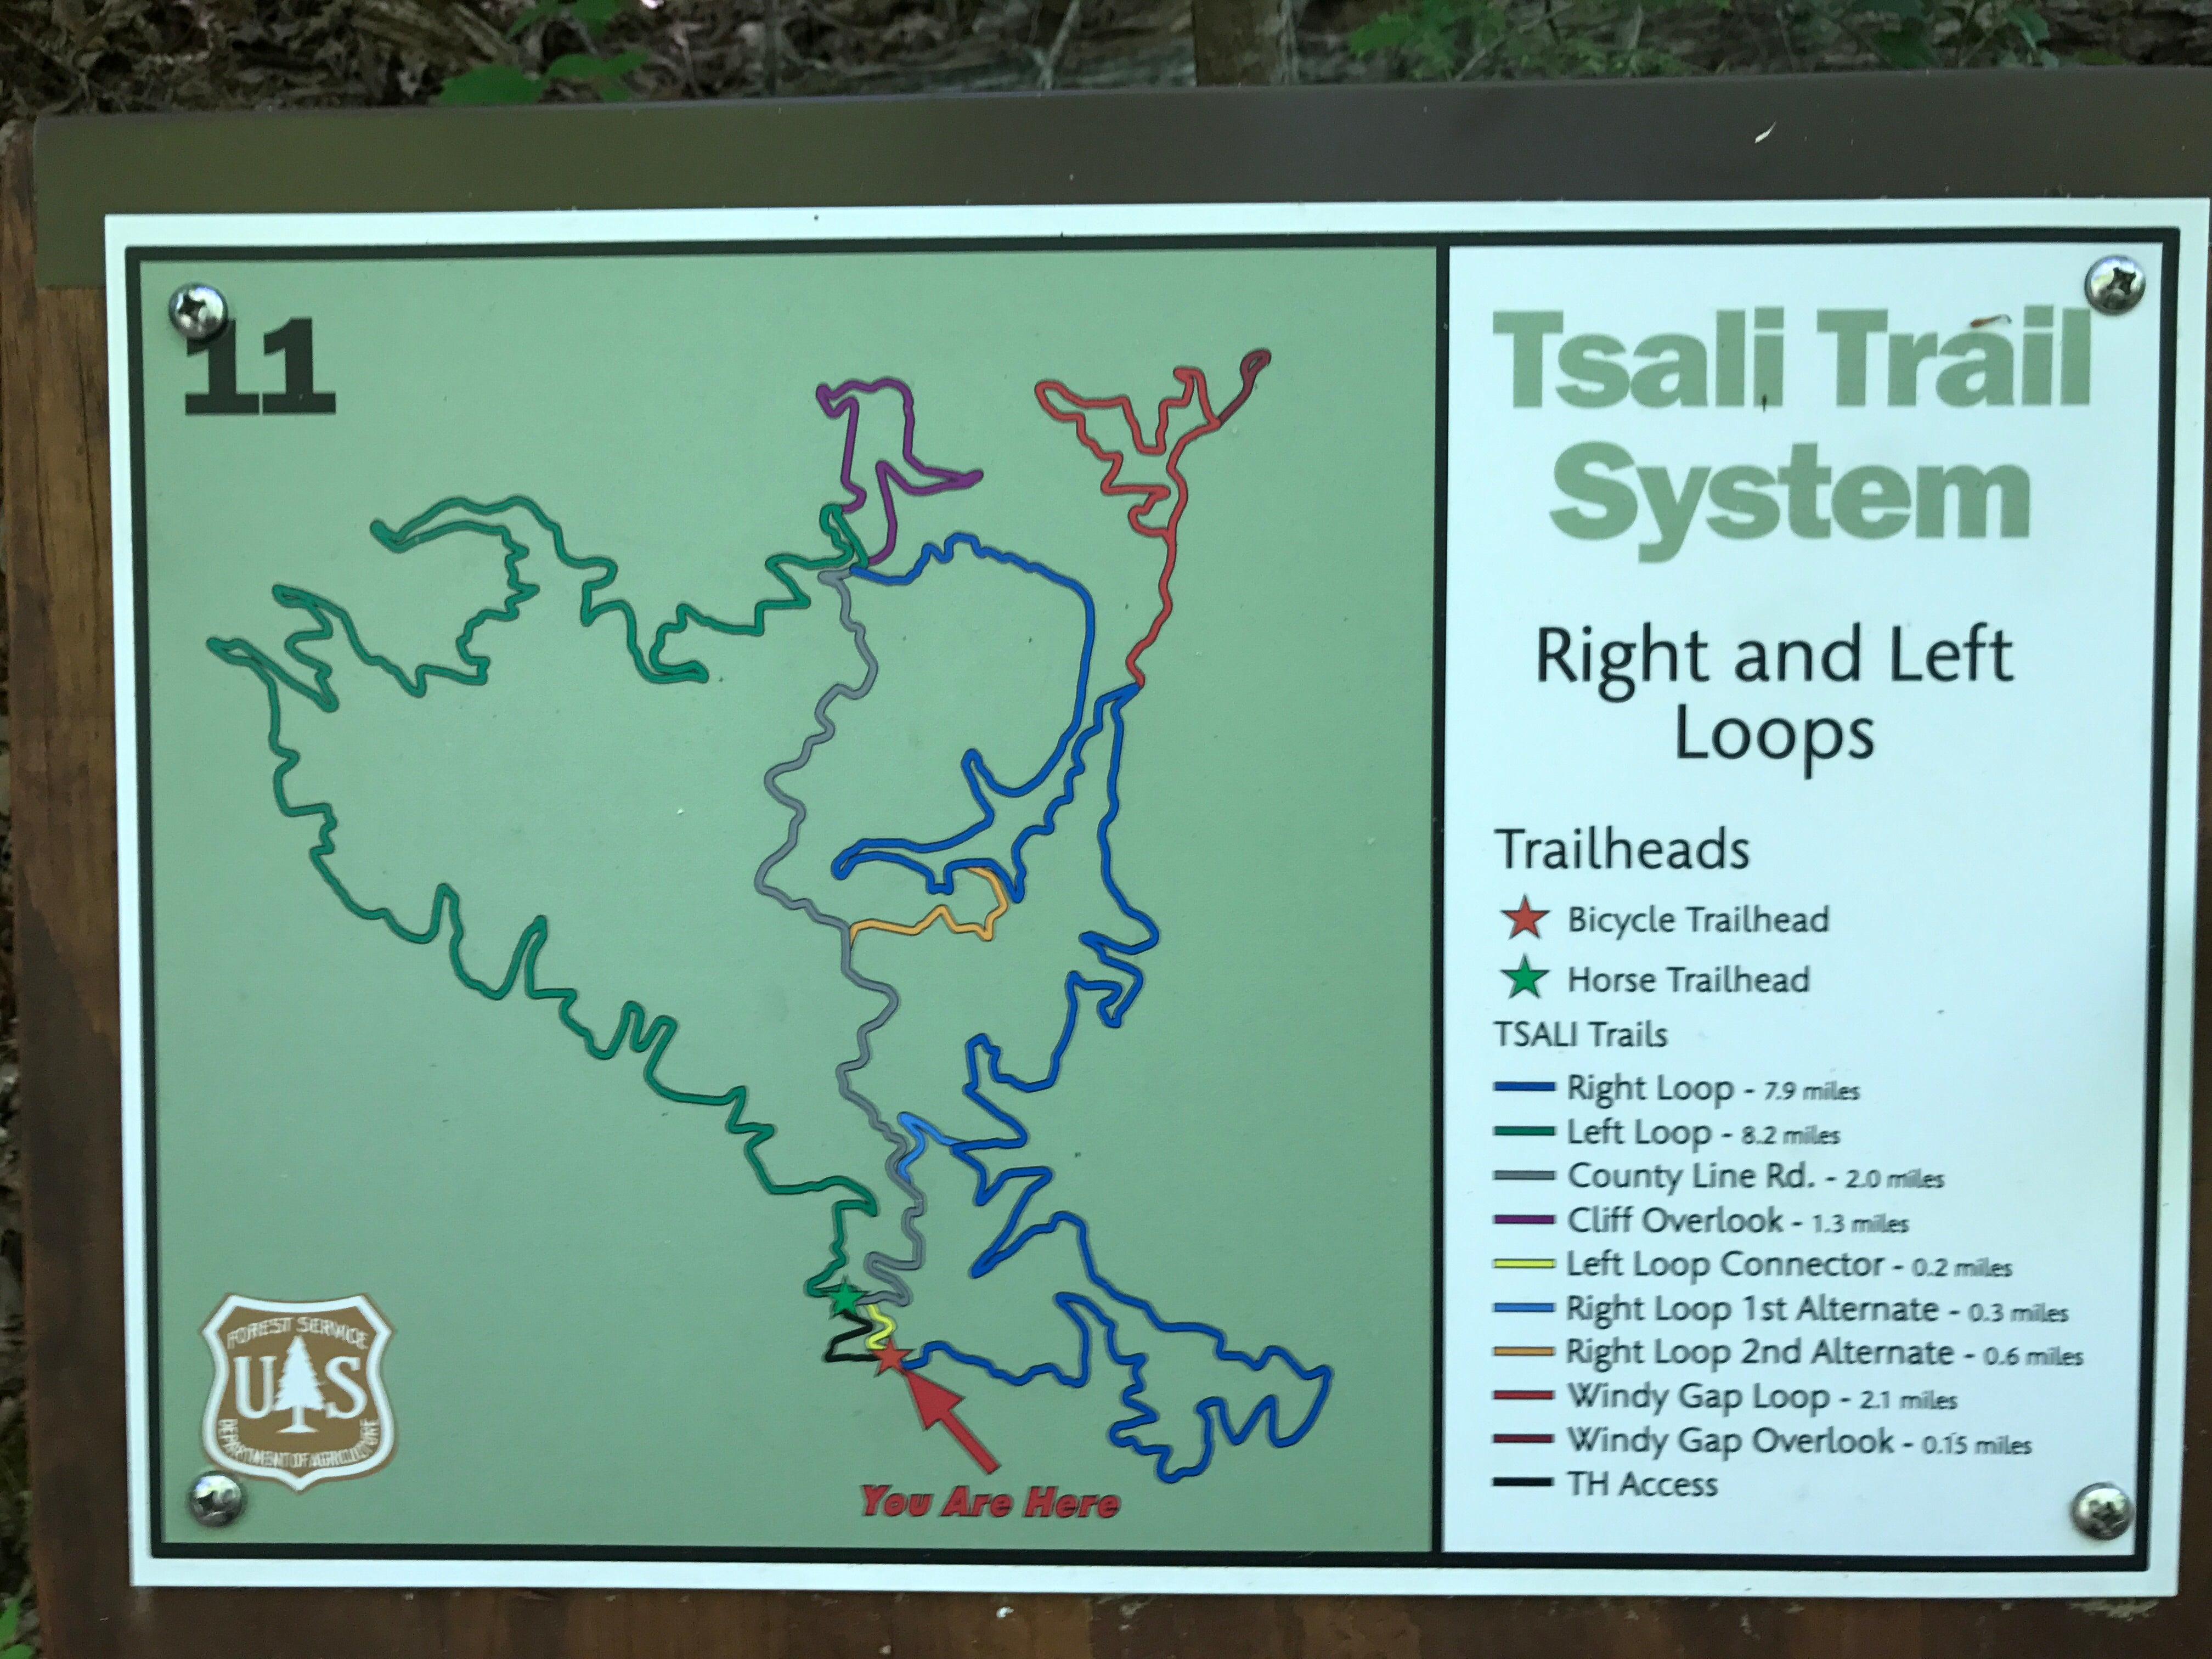 Well marked trails throughout. Start with blue, which has more "shortcuts" in case you encounter physical or technical problems. 